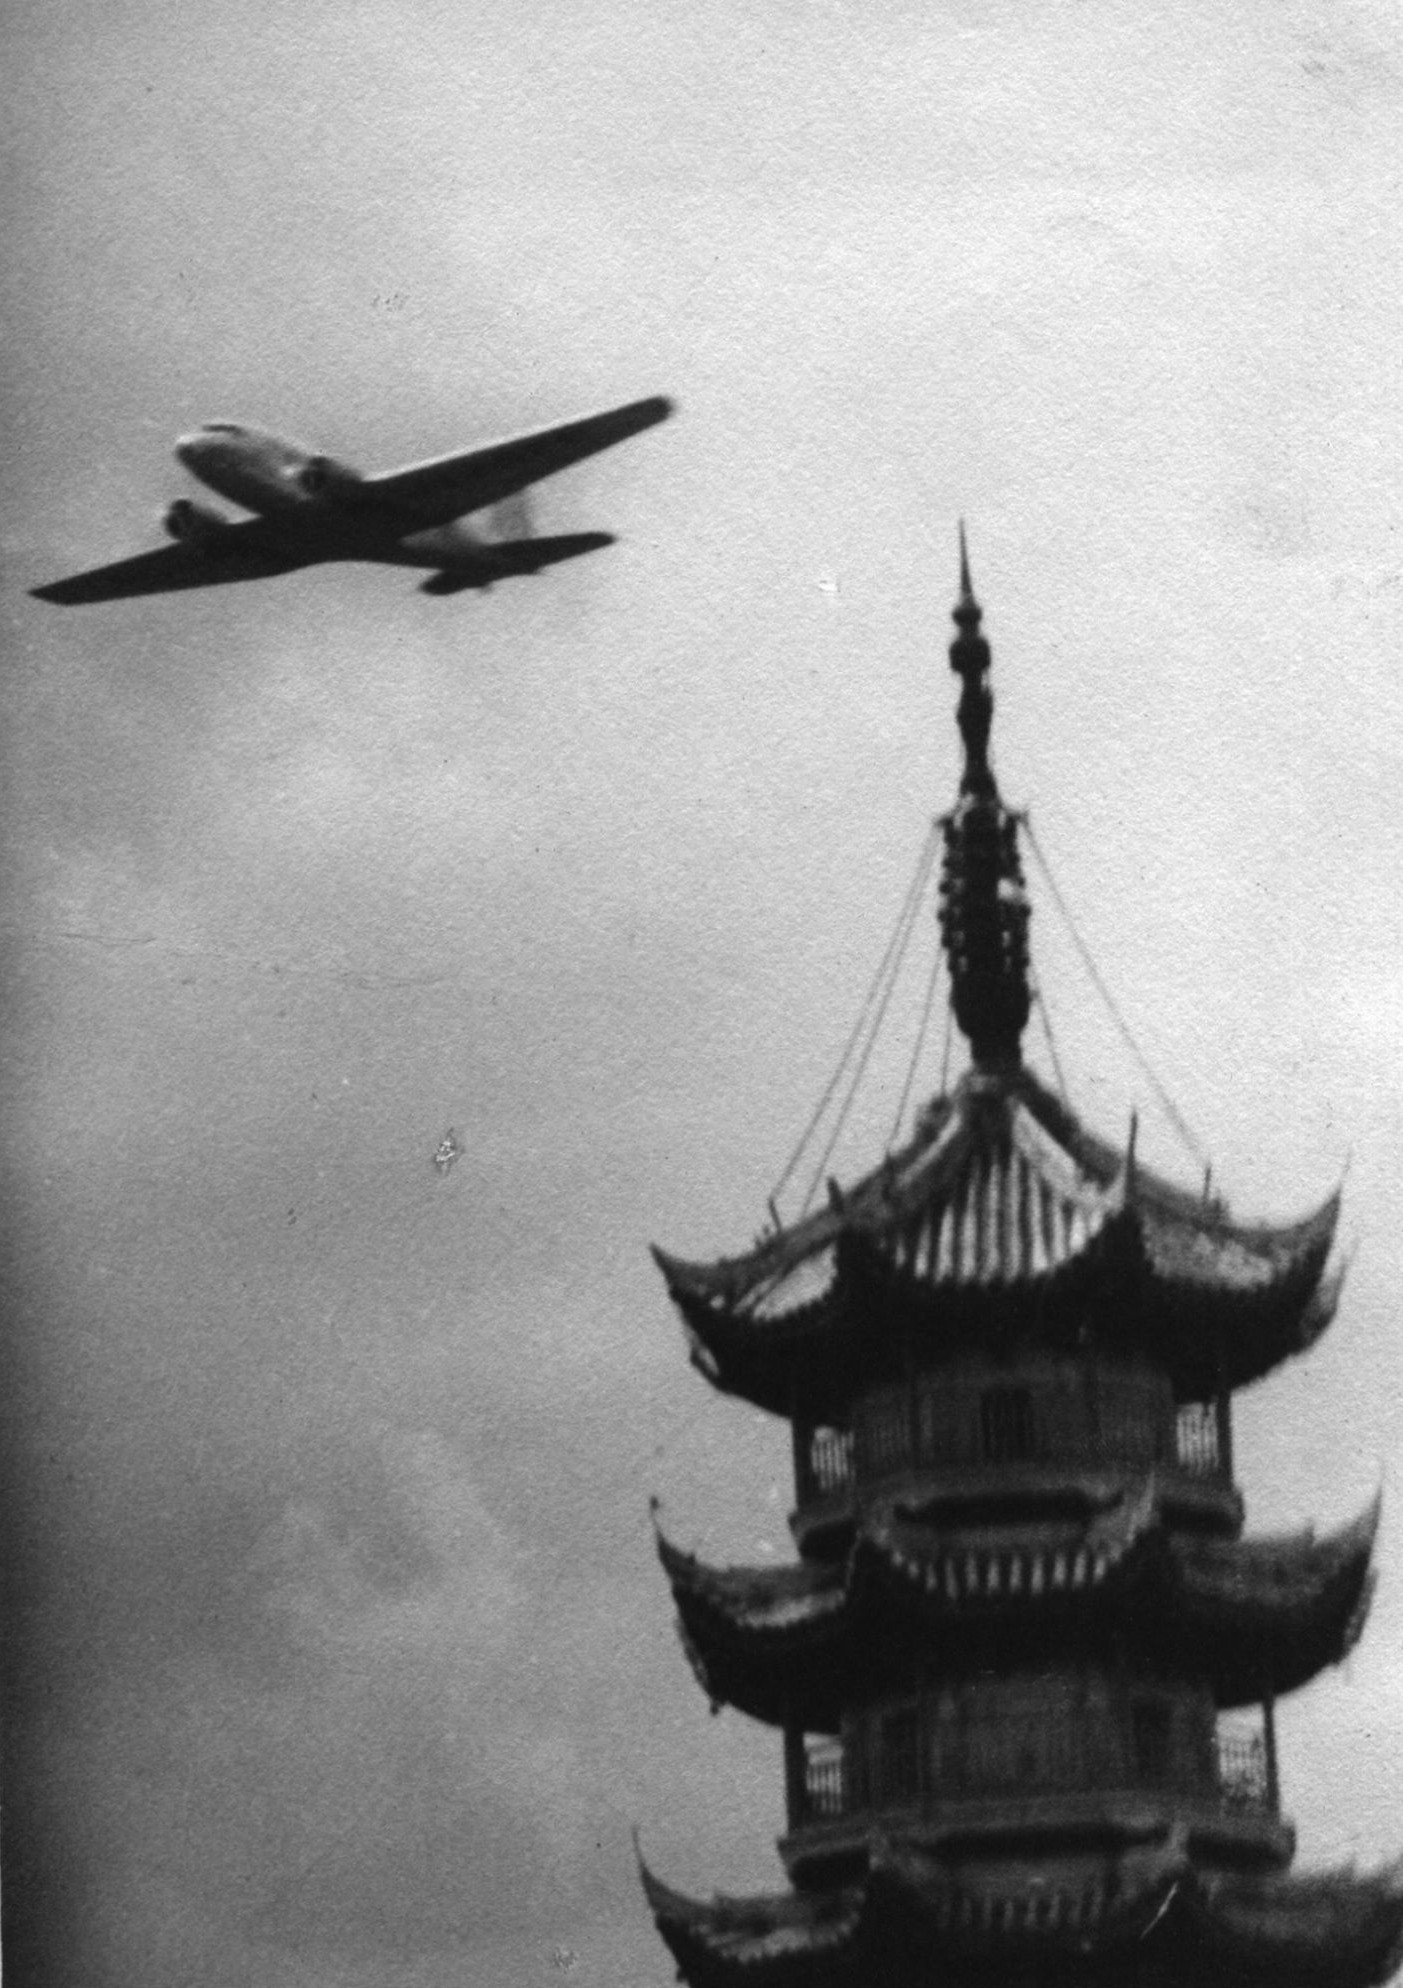 DC-2 passenger aircraft of China National Aviation Corporation on its maiden flight, over the pagoda of Longhua Temple, Shanghai, China, May 1935